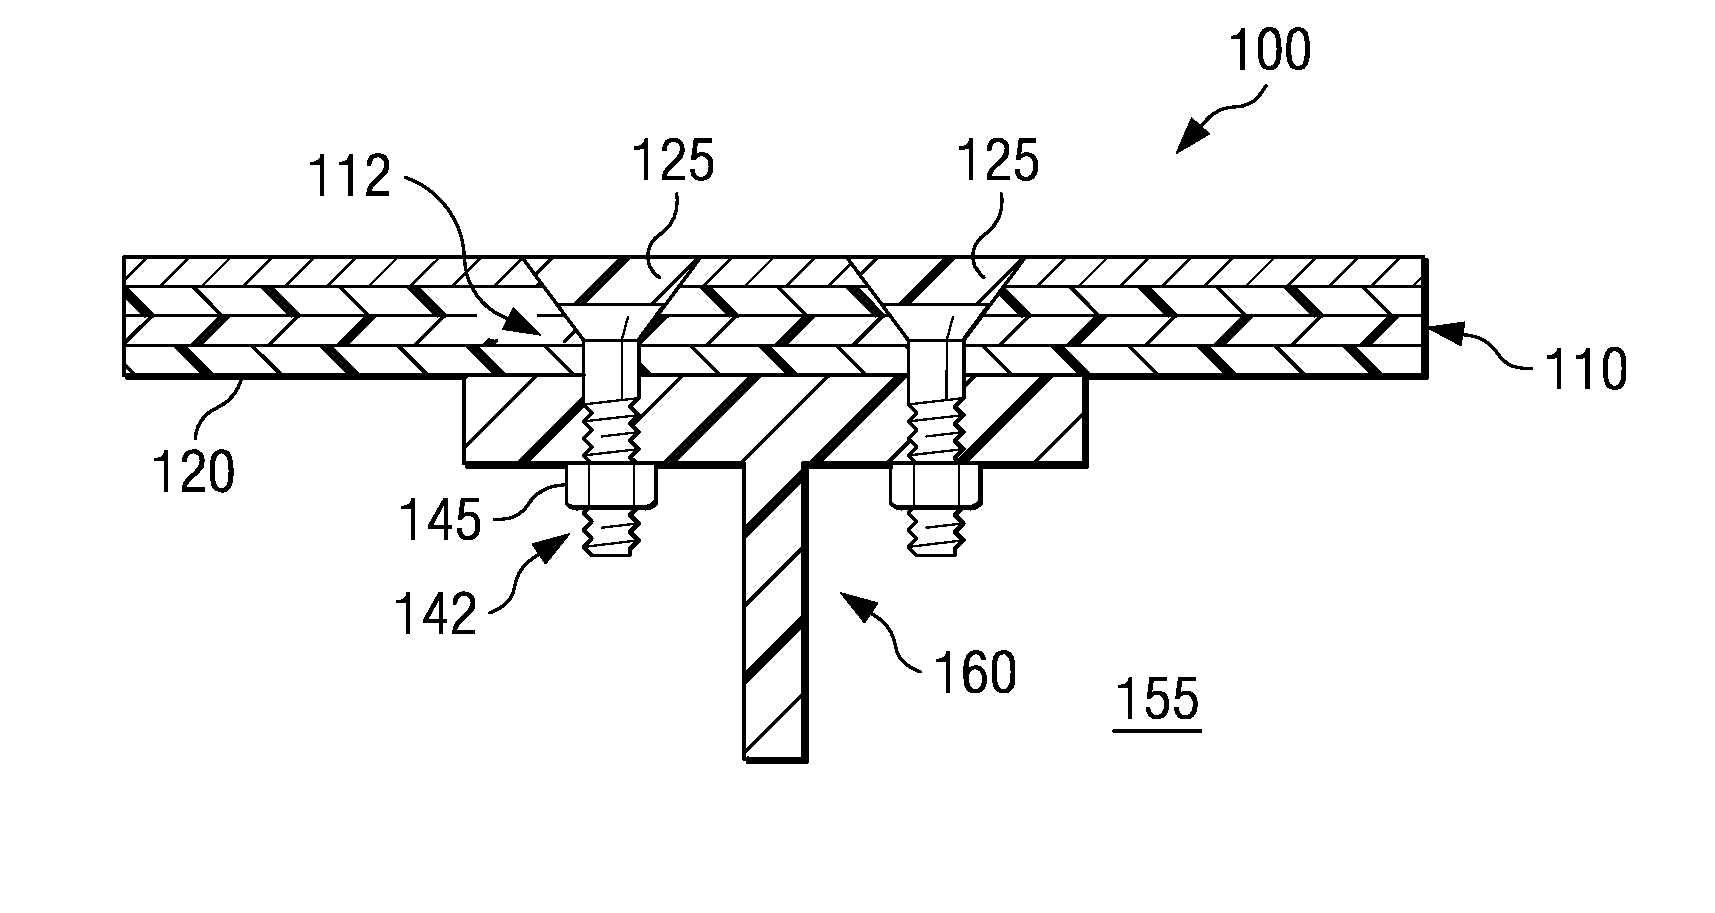 Lightning protection system for an aircraft composite structure